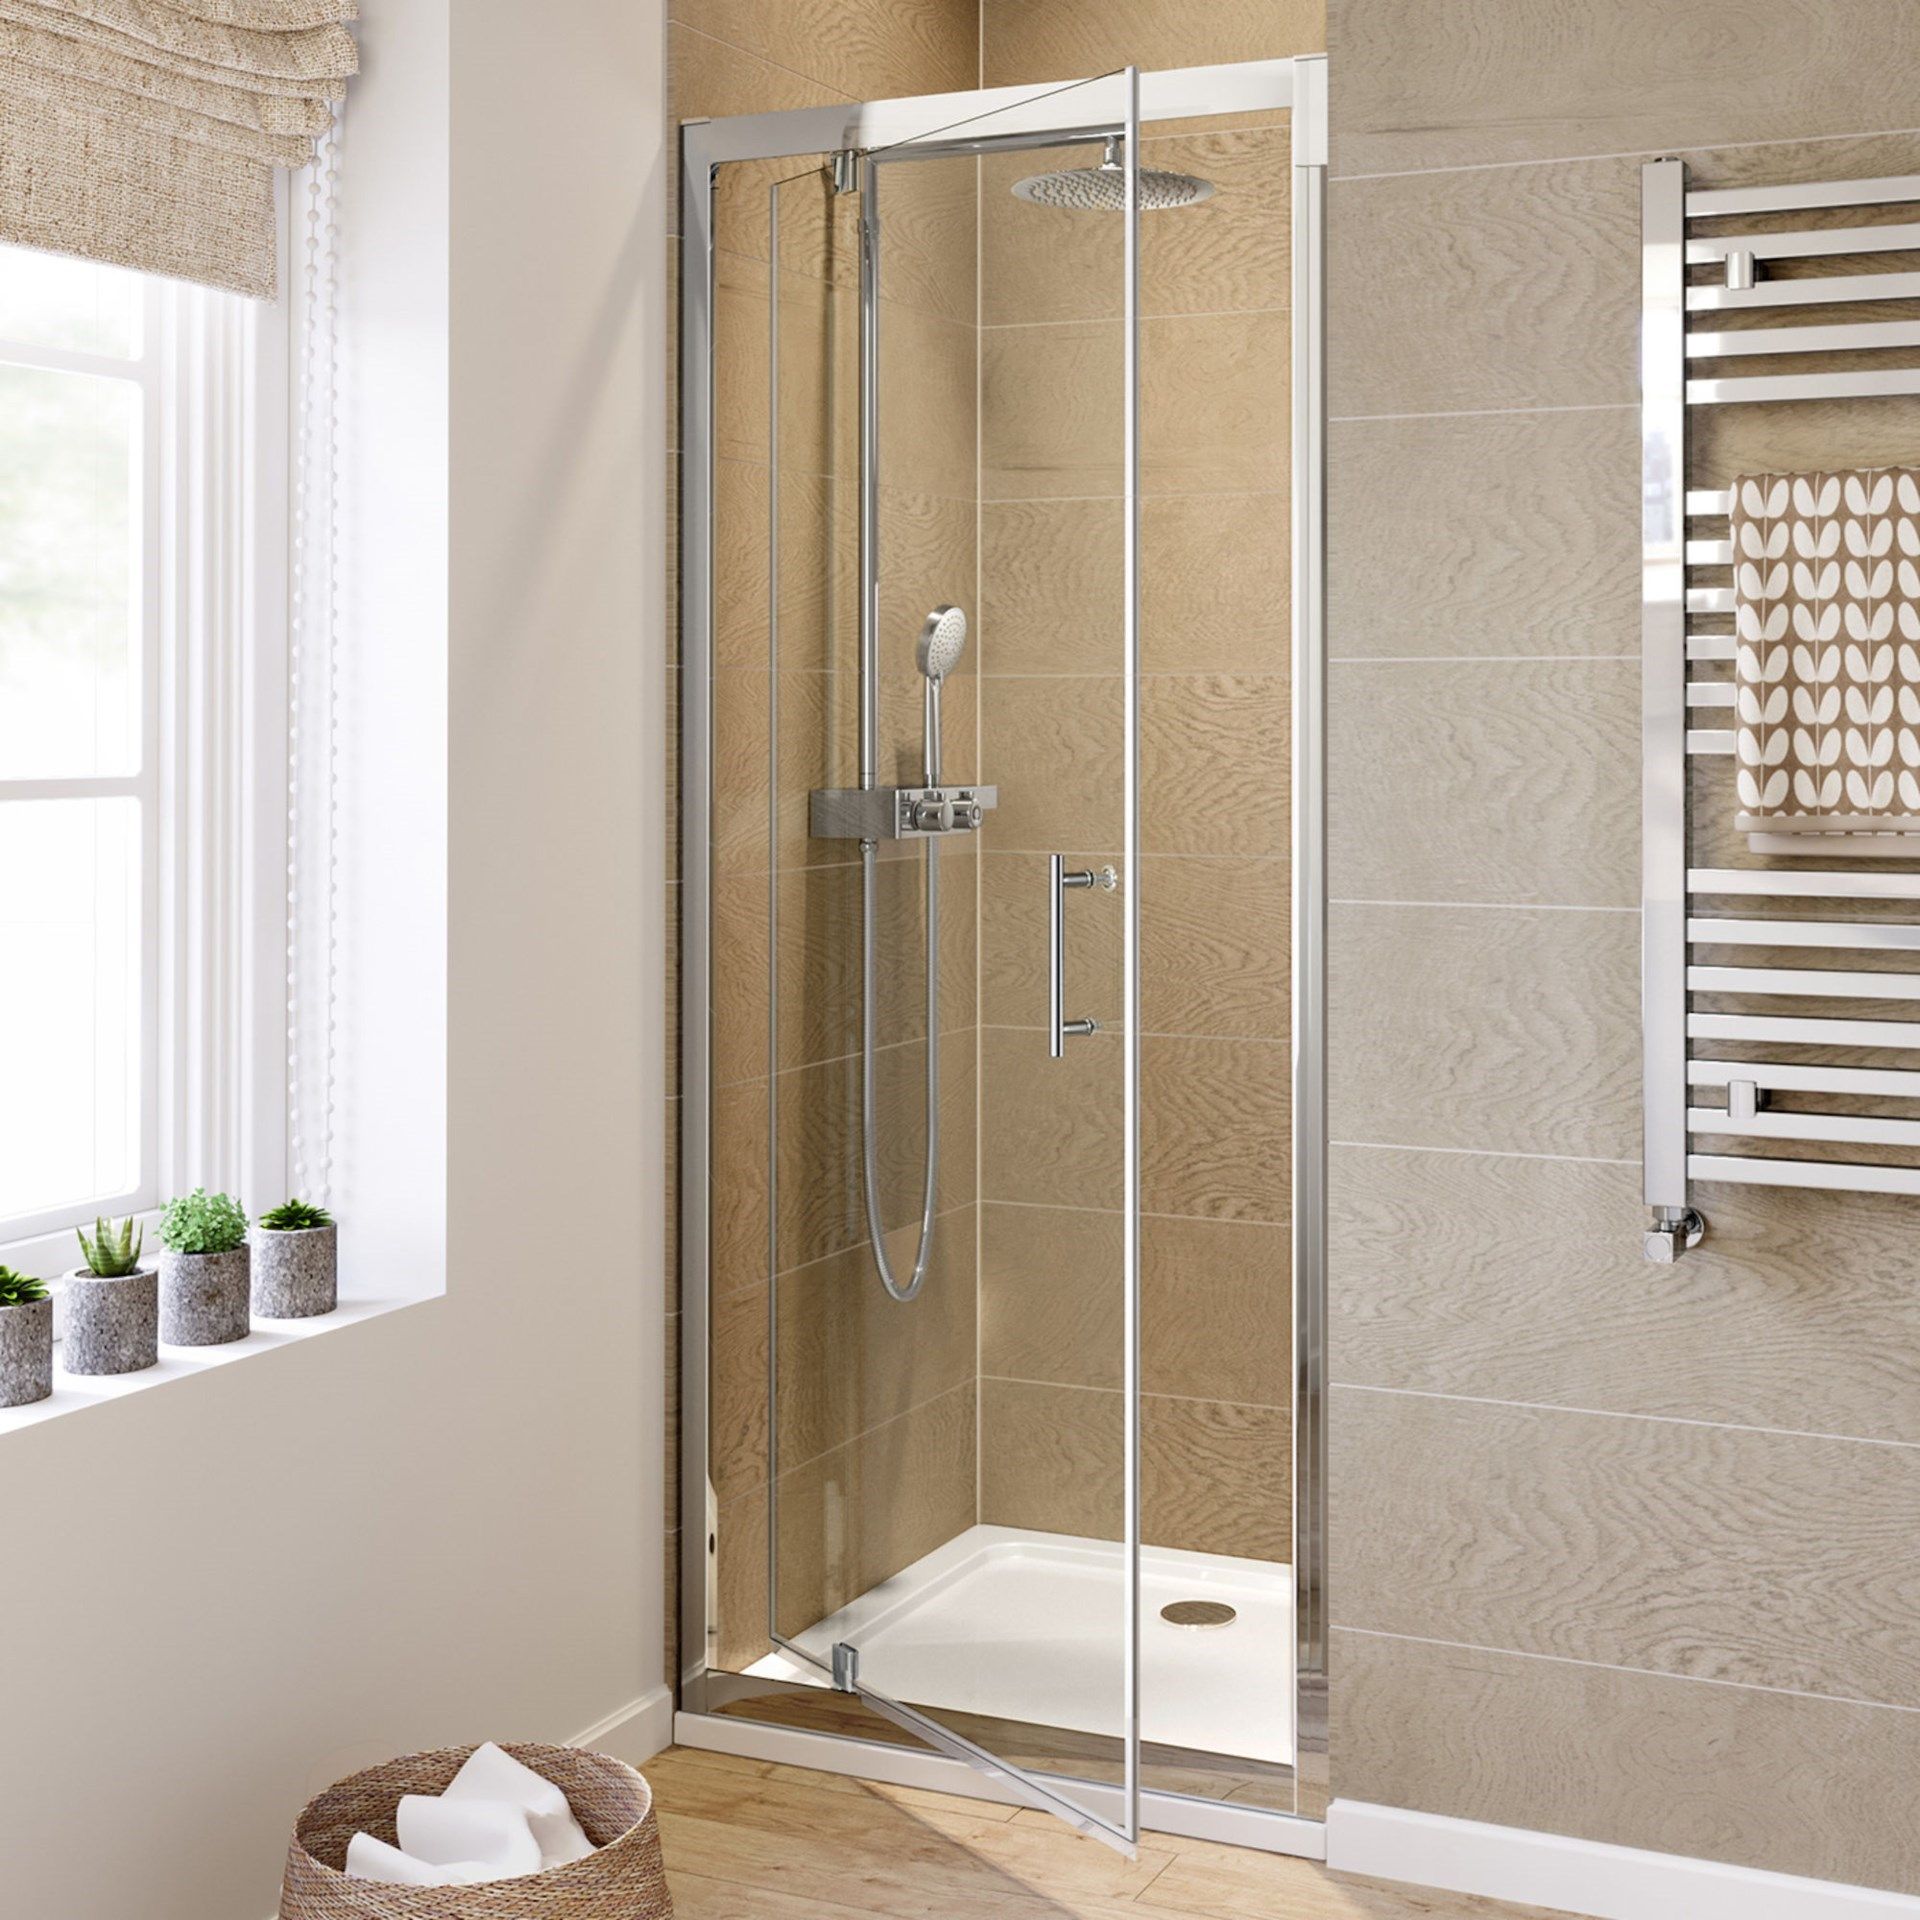 Twyfords 800mm - 6mm - Premium Pivot Shower Door. RRP £339.99.8mm Safety Glass Fully wat... - Image 2 of 3